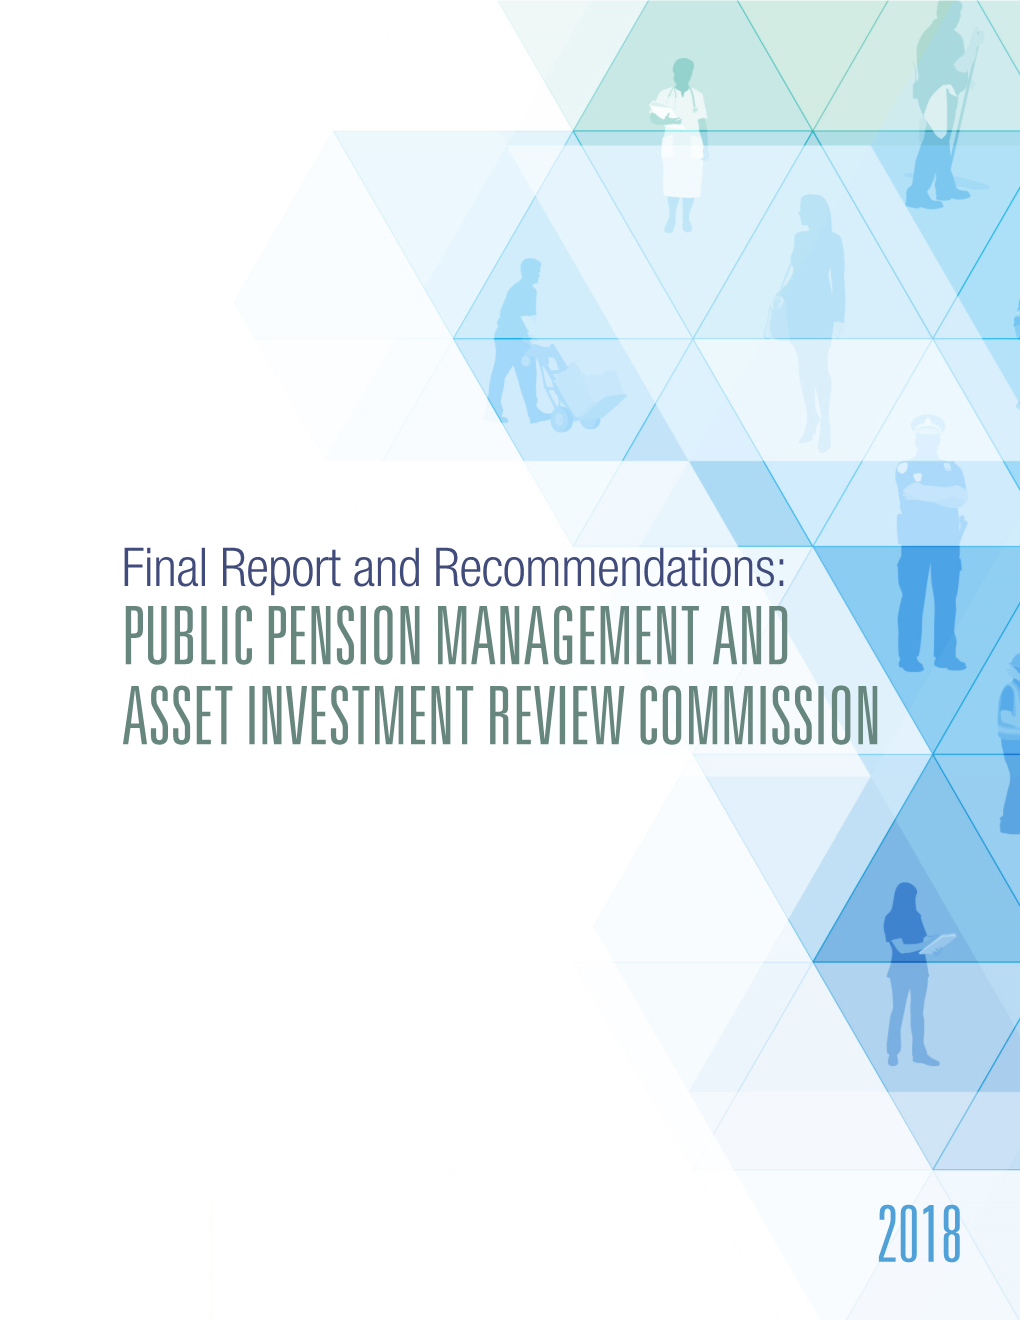 Public Pension Management and Asset Investment Review Commission